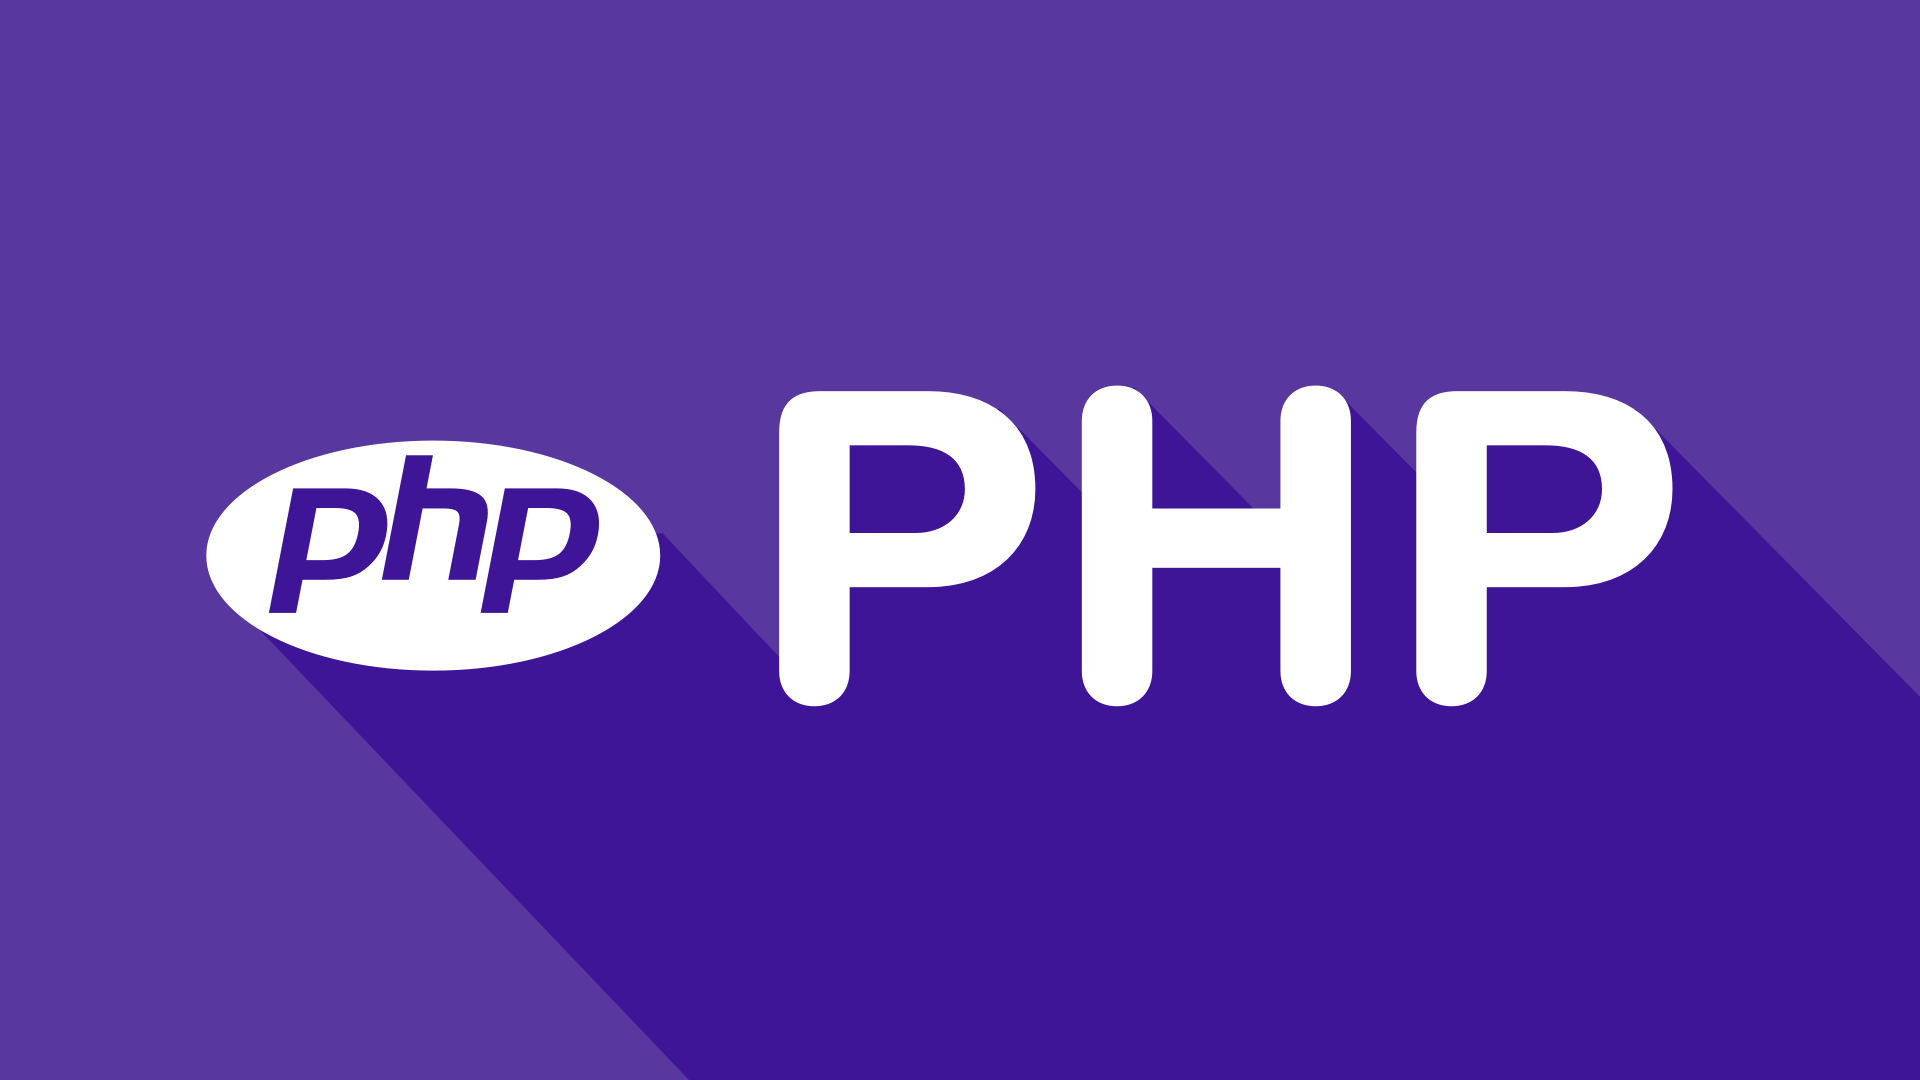 PHP 5 Introduction to coding Tutorial